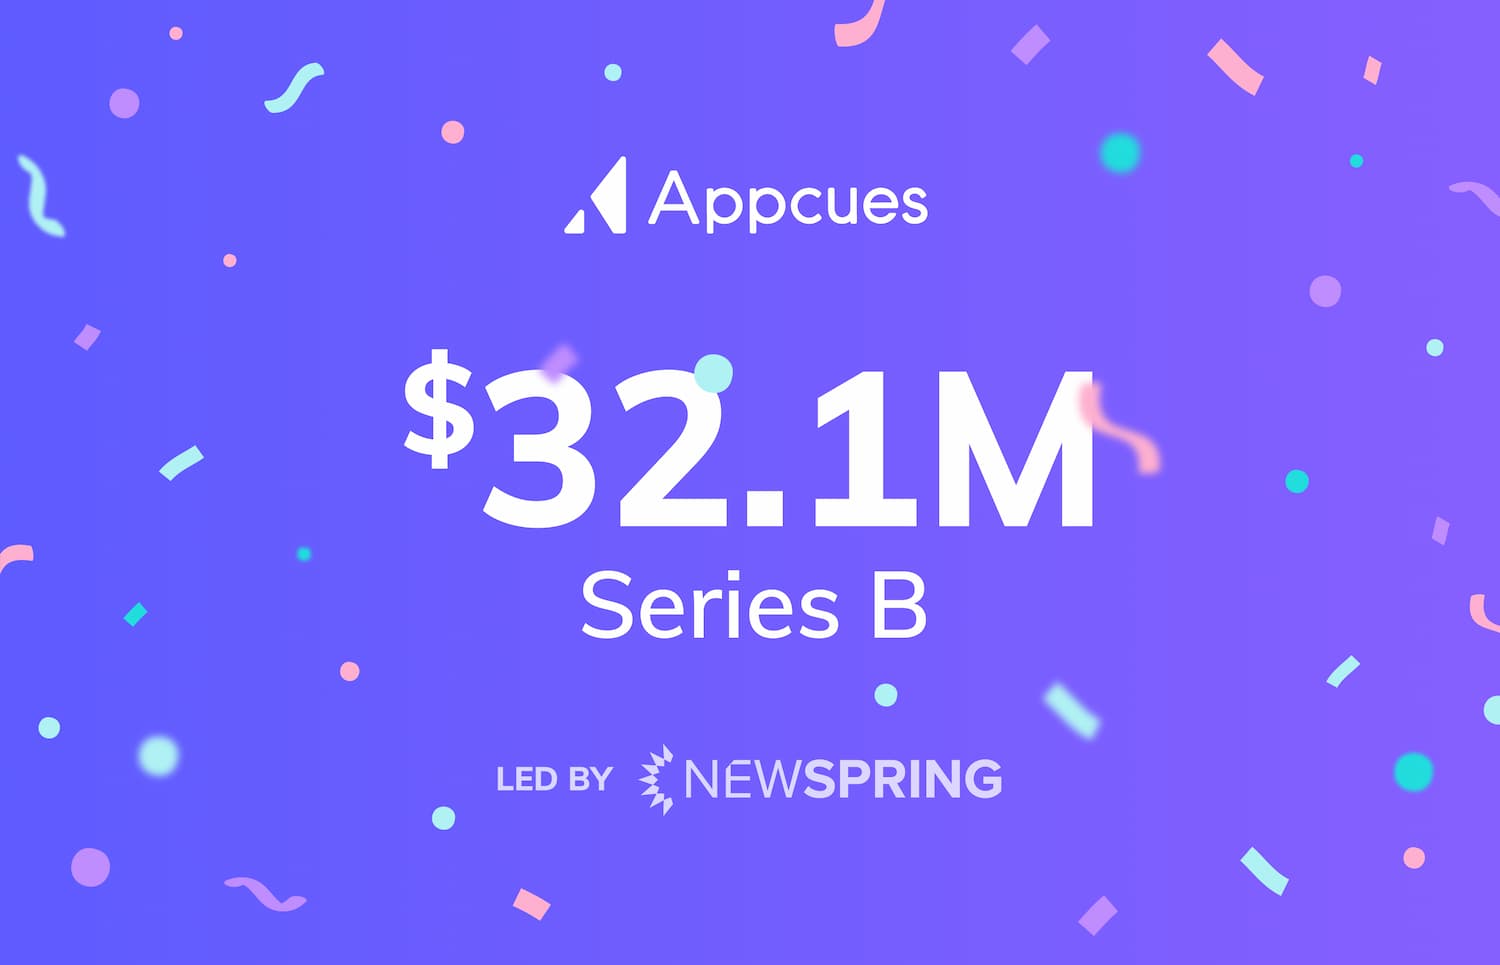 text: appcues raises a $32.1M investment round